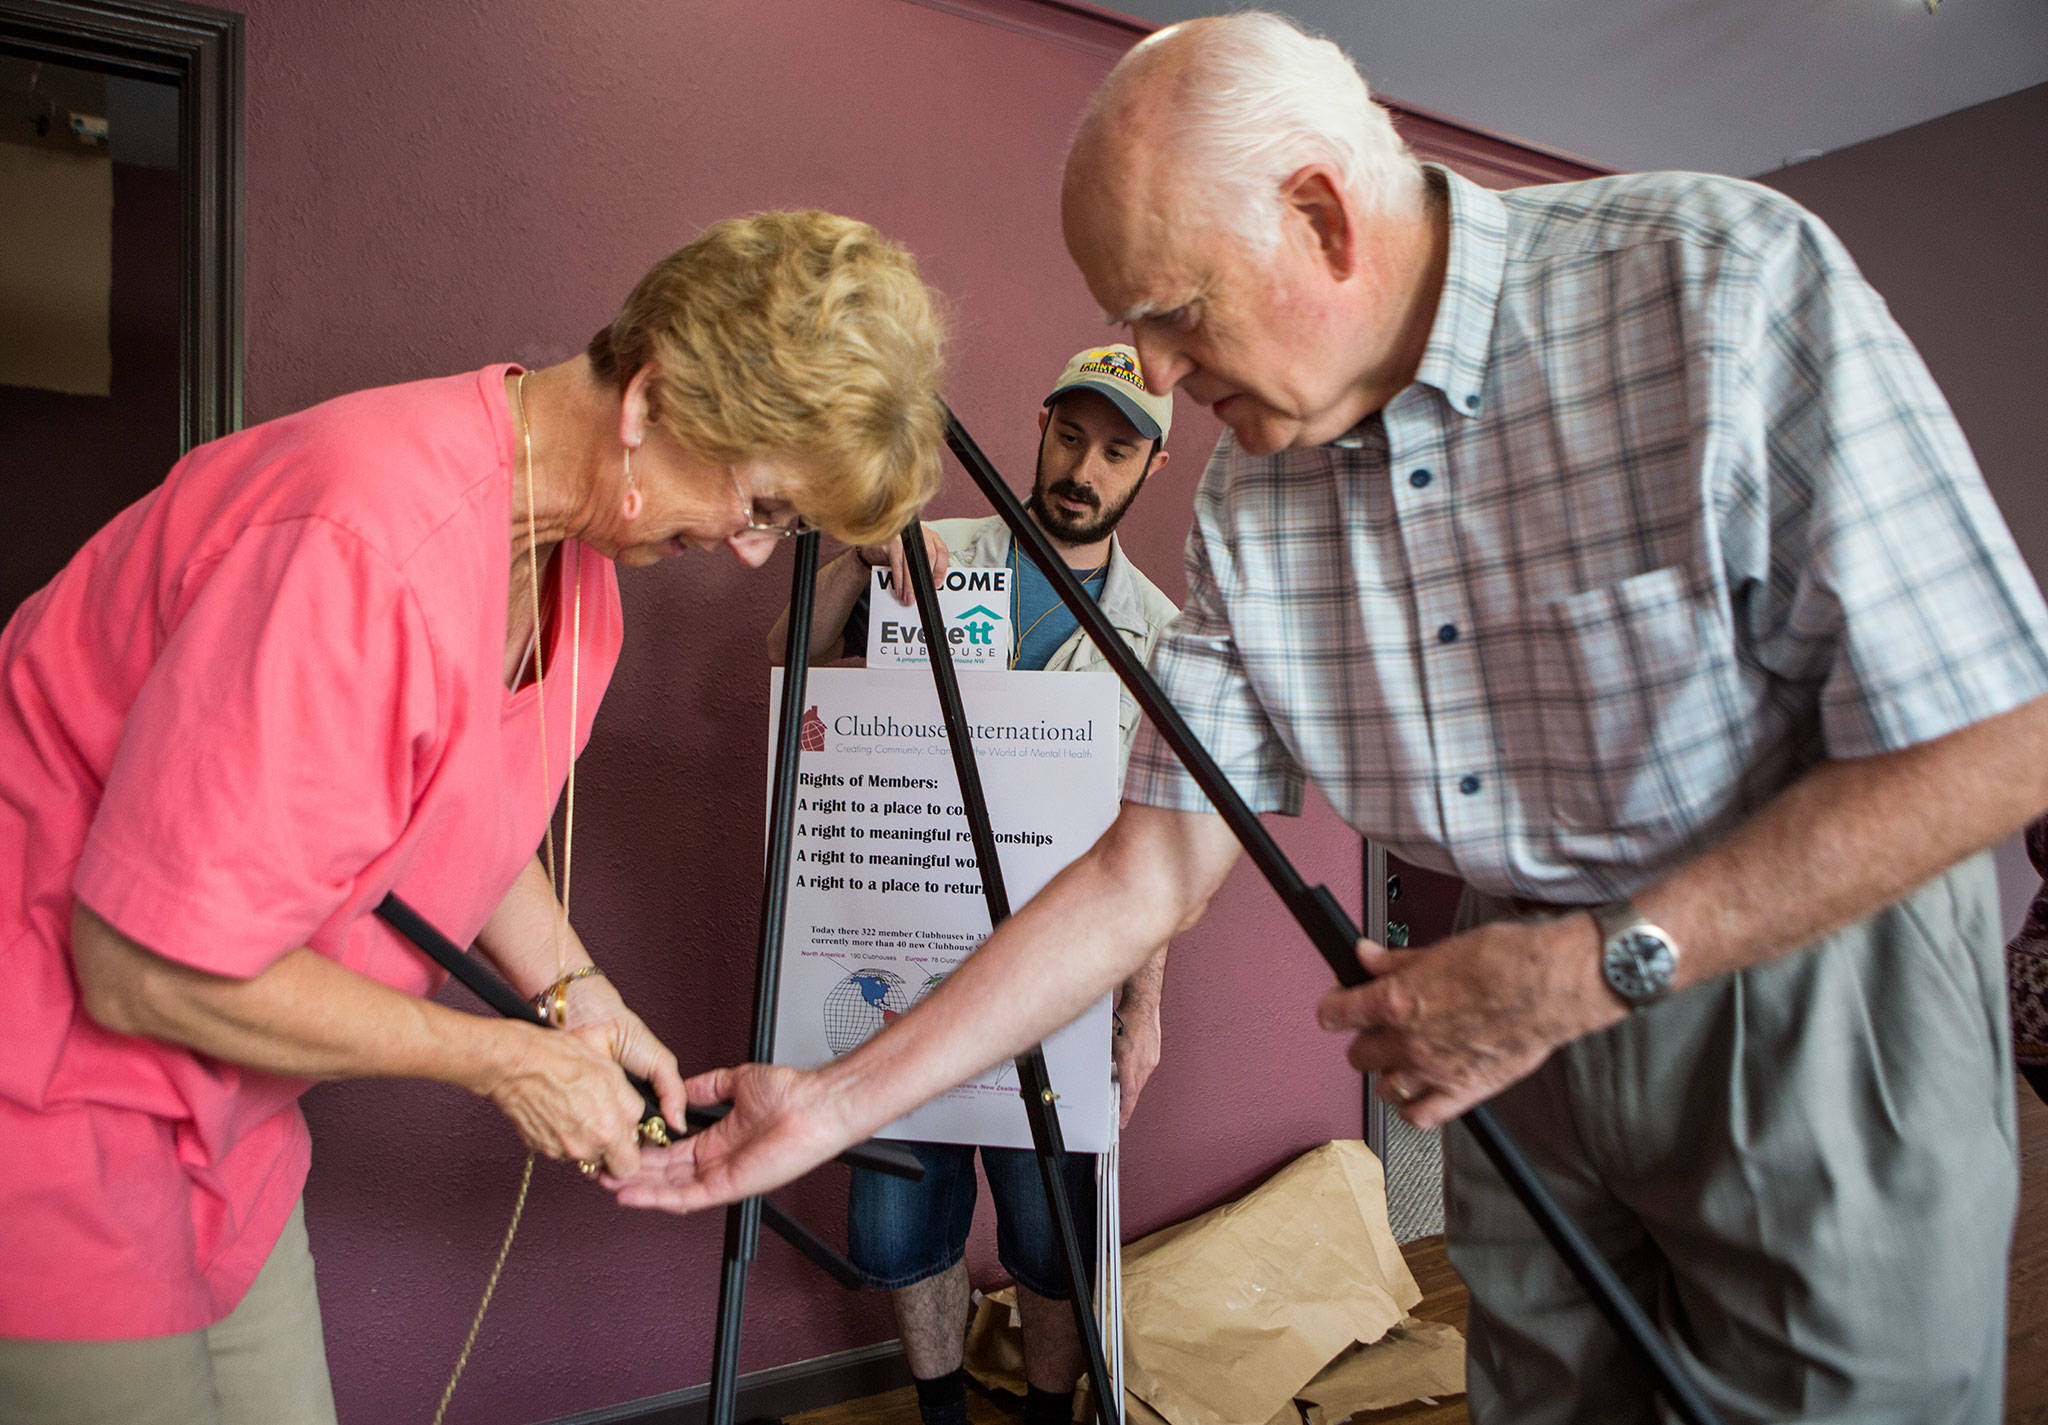 Clubhouse member Alex Odesskiy (center) helps Meg McClure (left) and Meg’s husband, Harold McClure (right), set up a poster stand at the Everett Clubhouse. Harold McClure calls the opening of the clubhouse “the fulfillment of a vision.” (Olivia Vanni / The Herald)